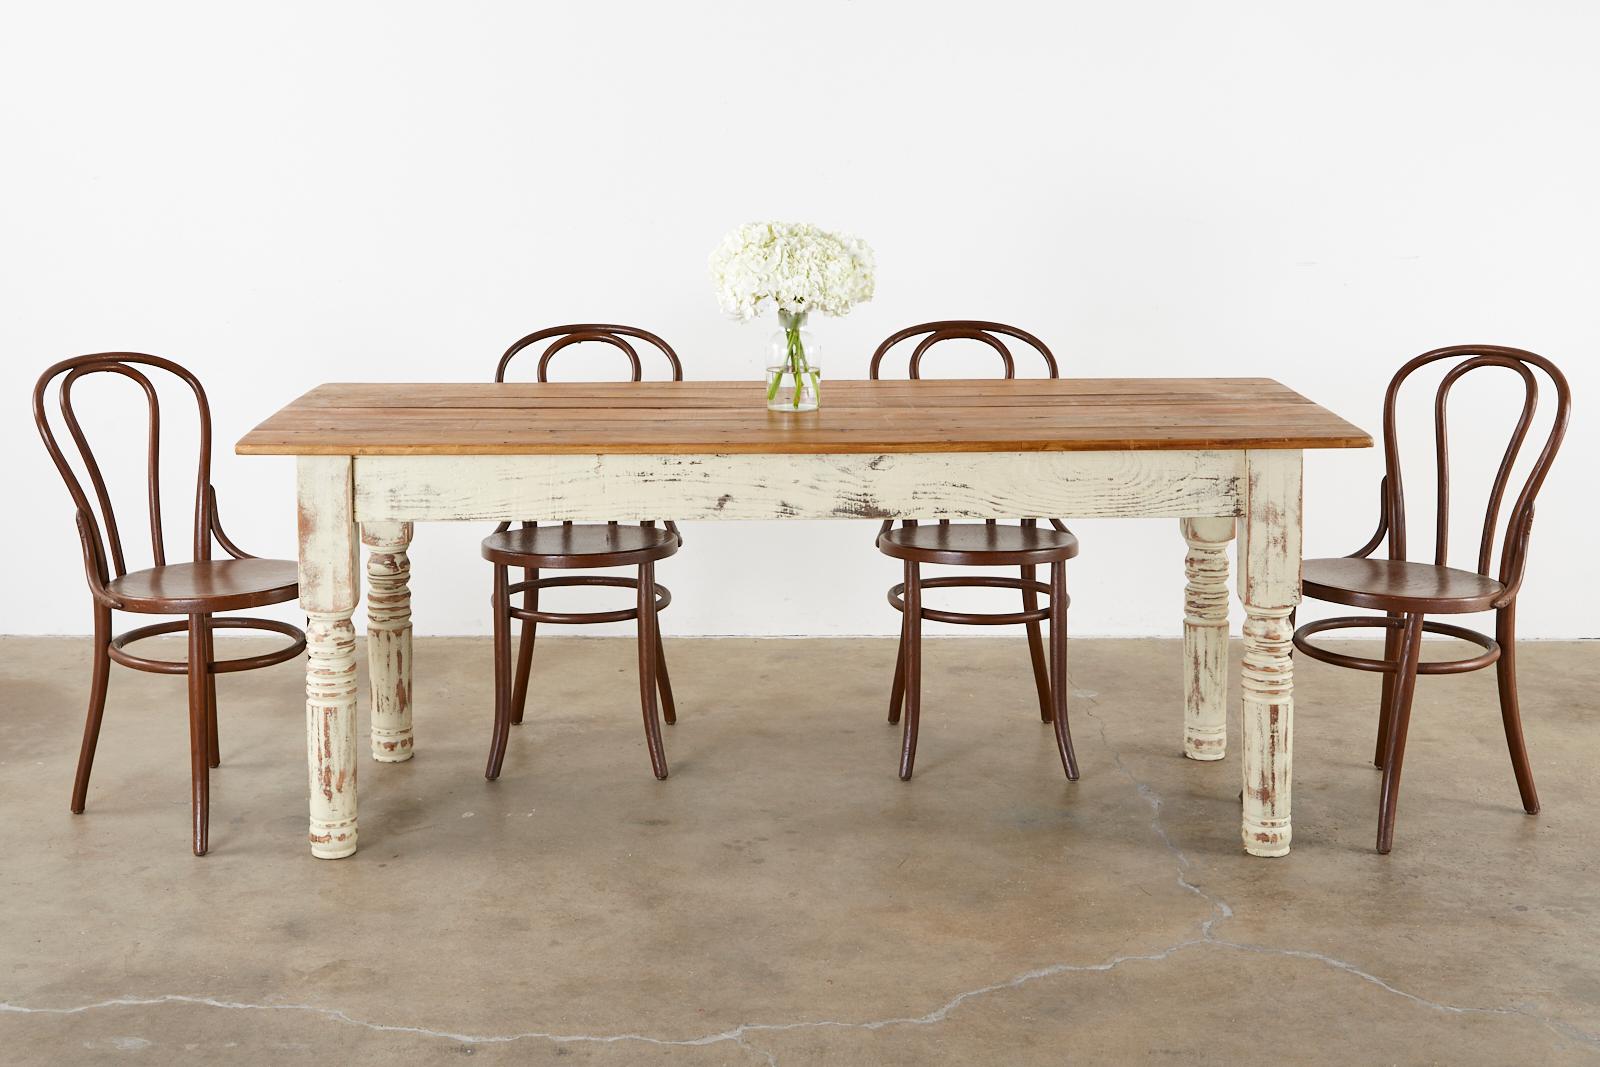 Country American rustic farmhouse dining table or harvest table featuring a cream colored painted pine base. The top is constructed using reclaimed pine barnwood with tongue in groove joinery and a natural finish. Old fence nail holes are still